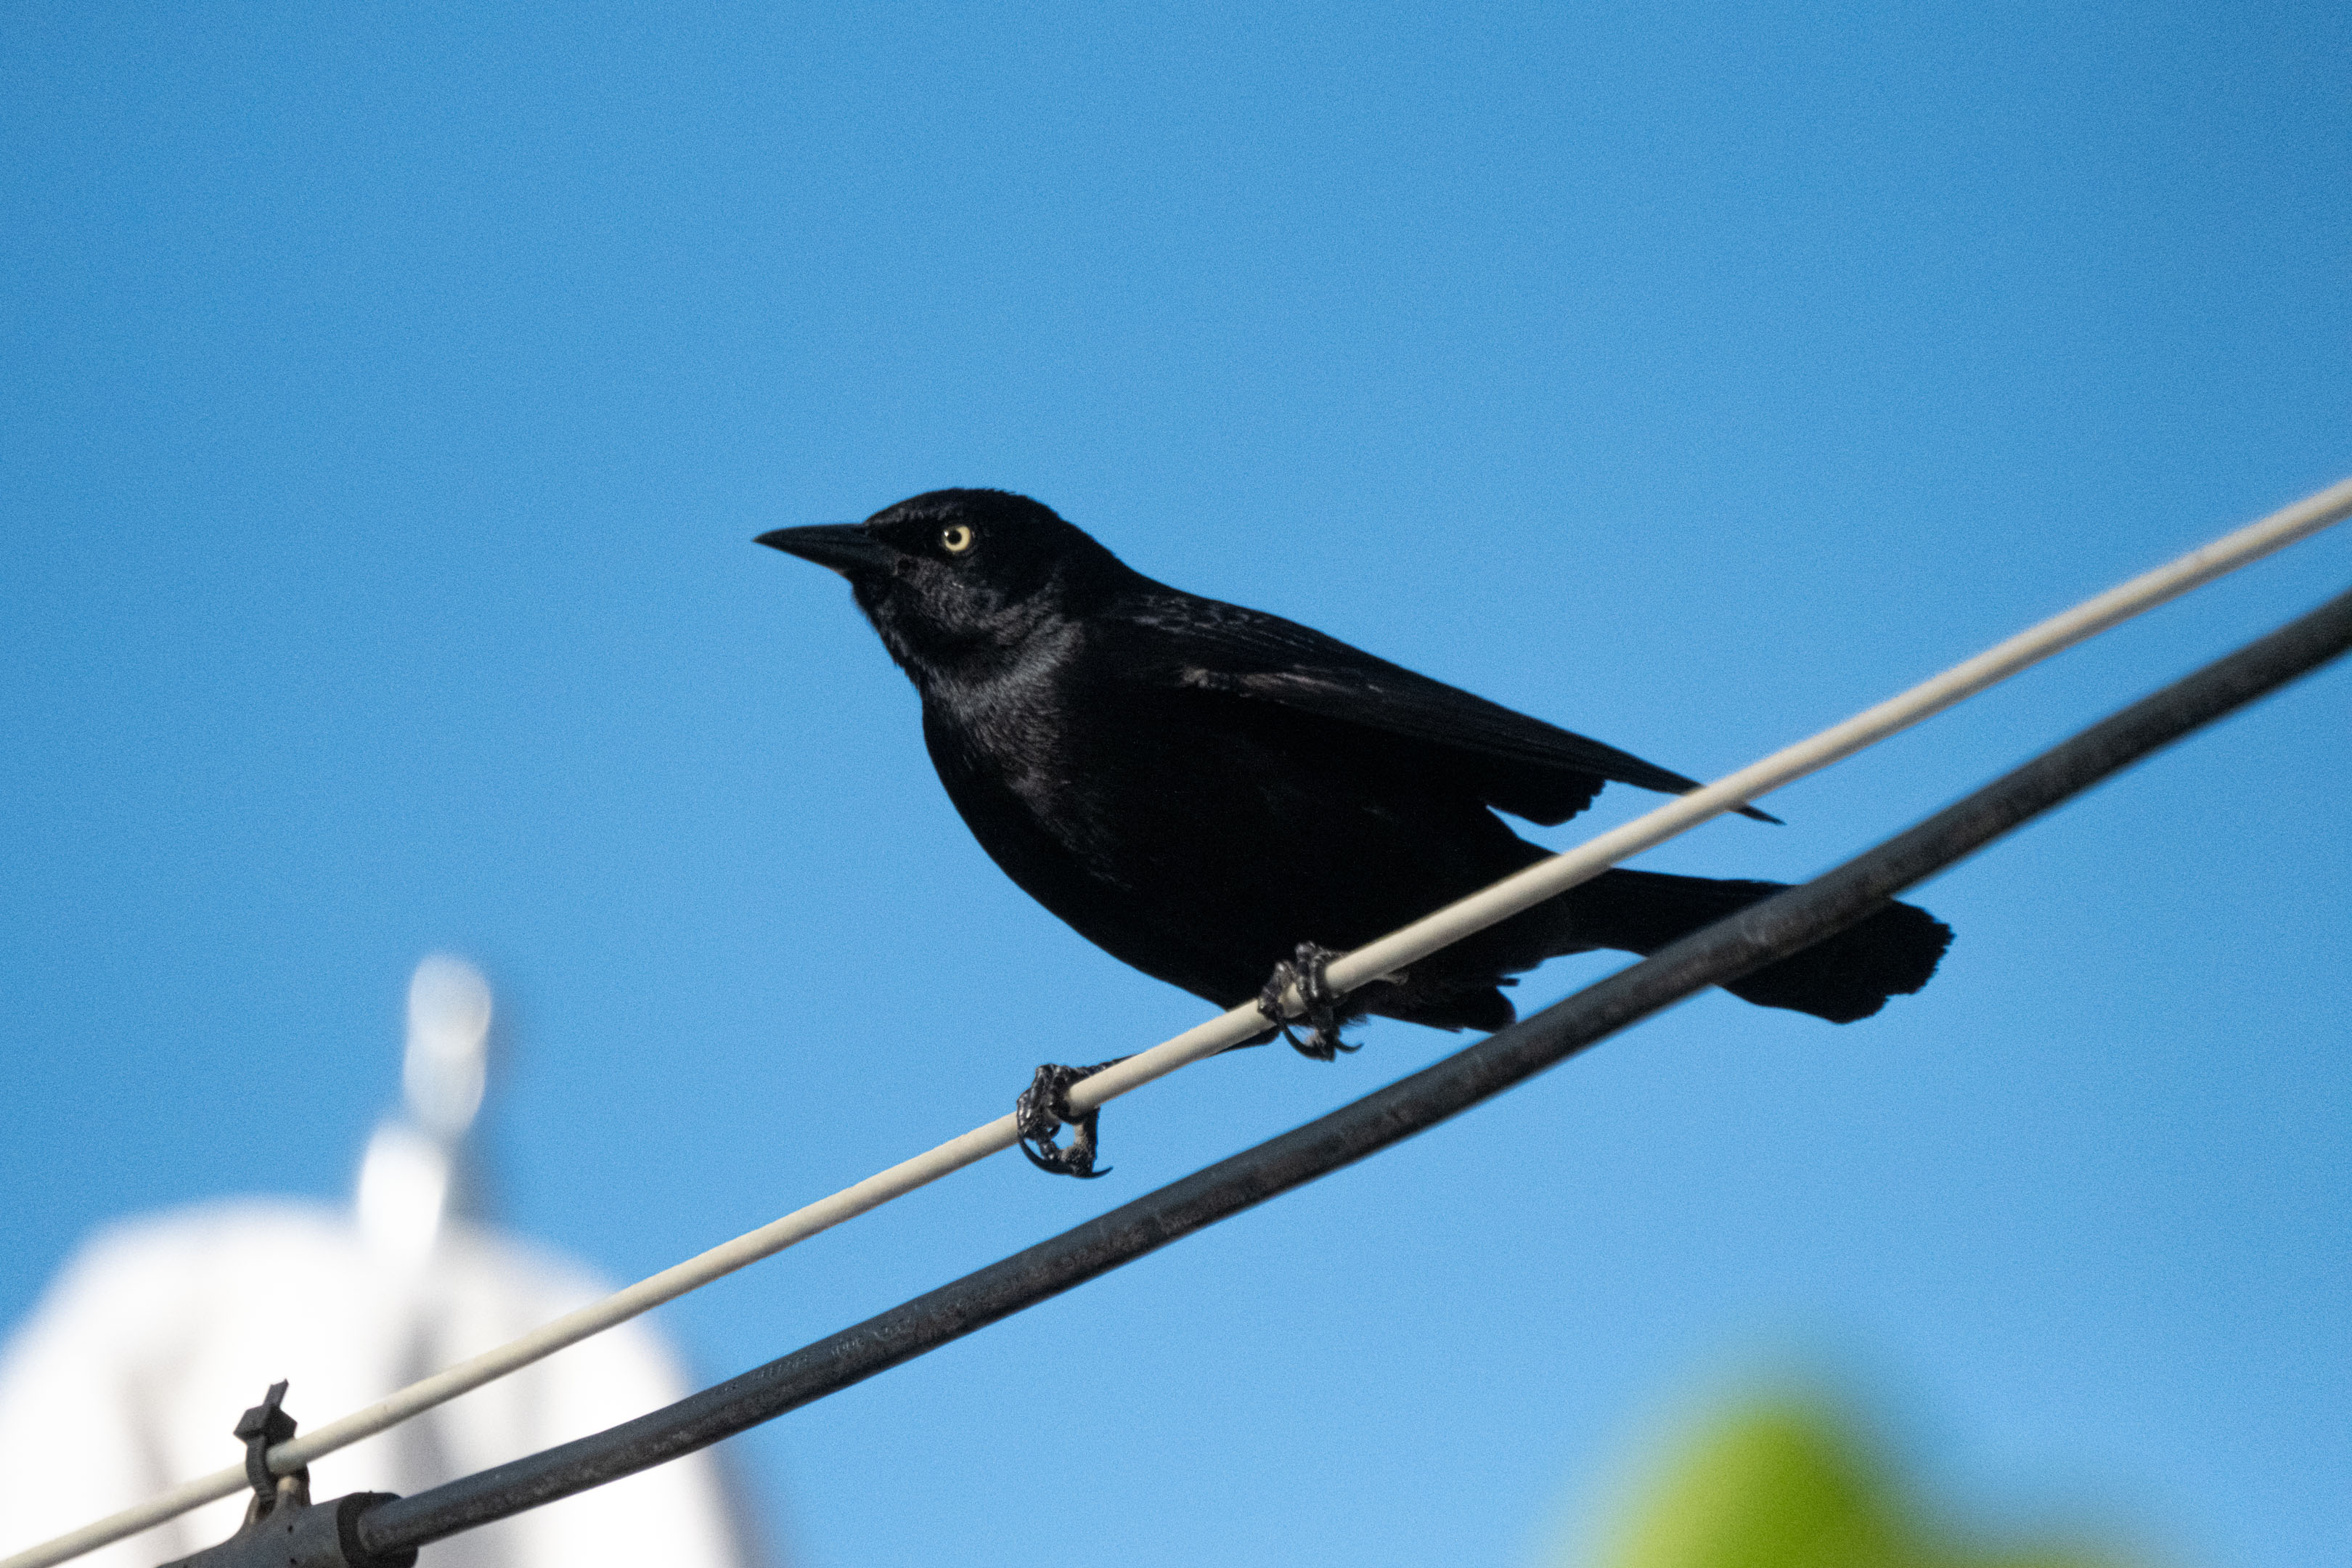 a black chango standing on a wire with the sky in the background